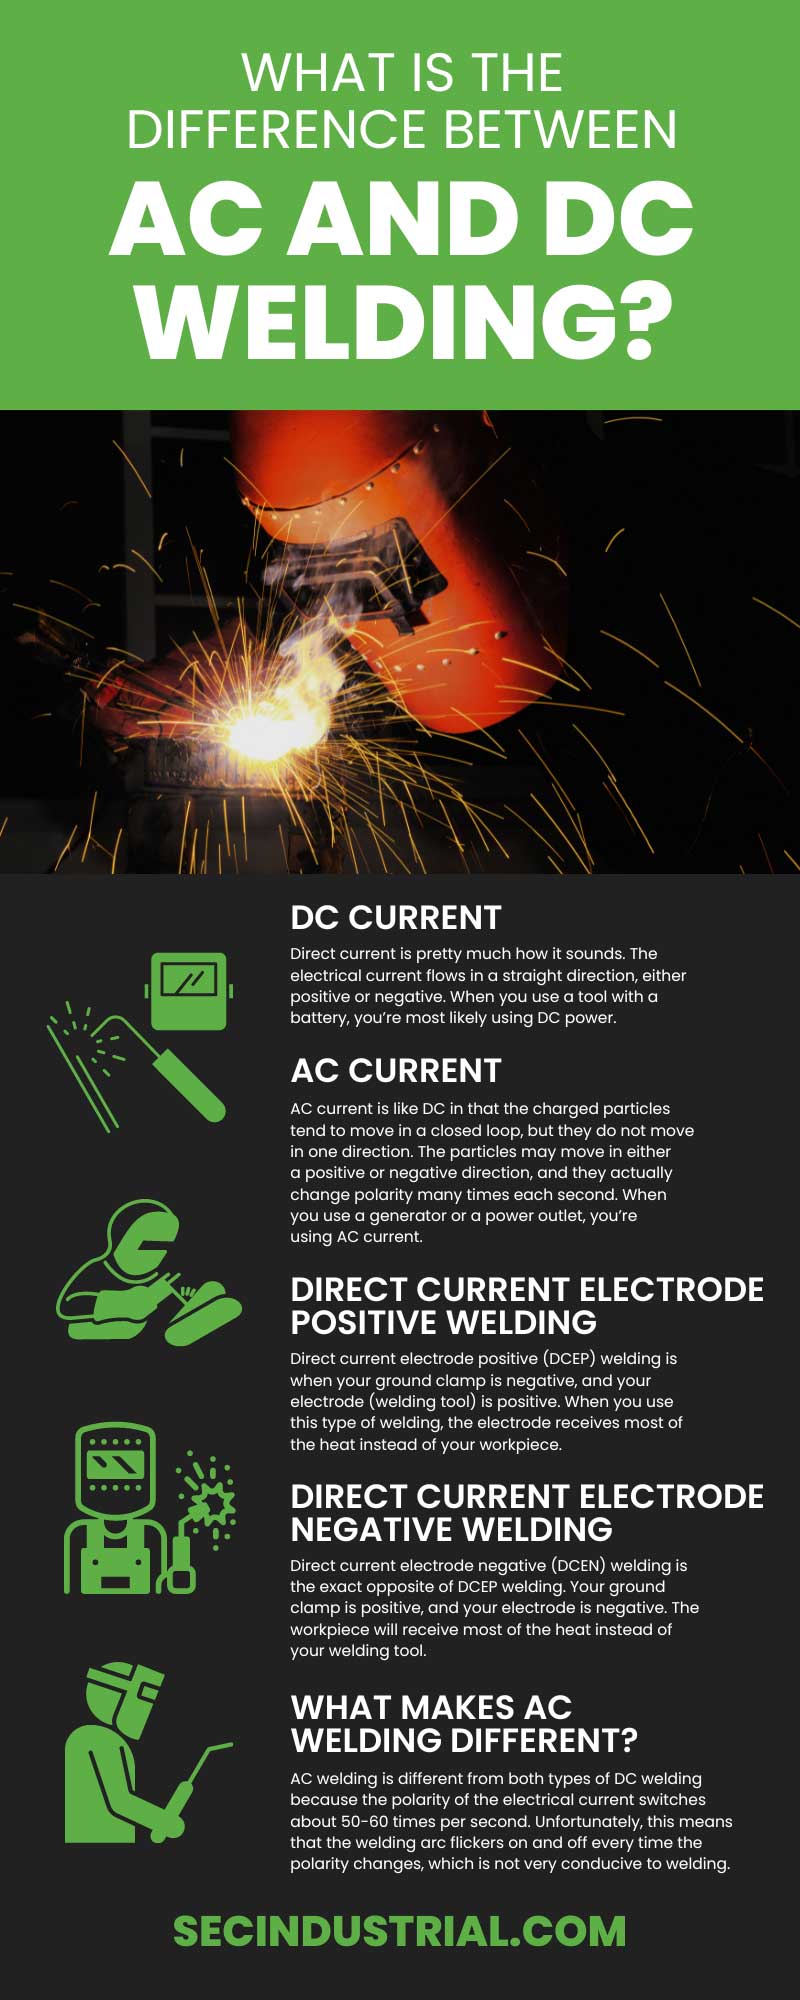 What Is the Difference Between AC and DC Welding?